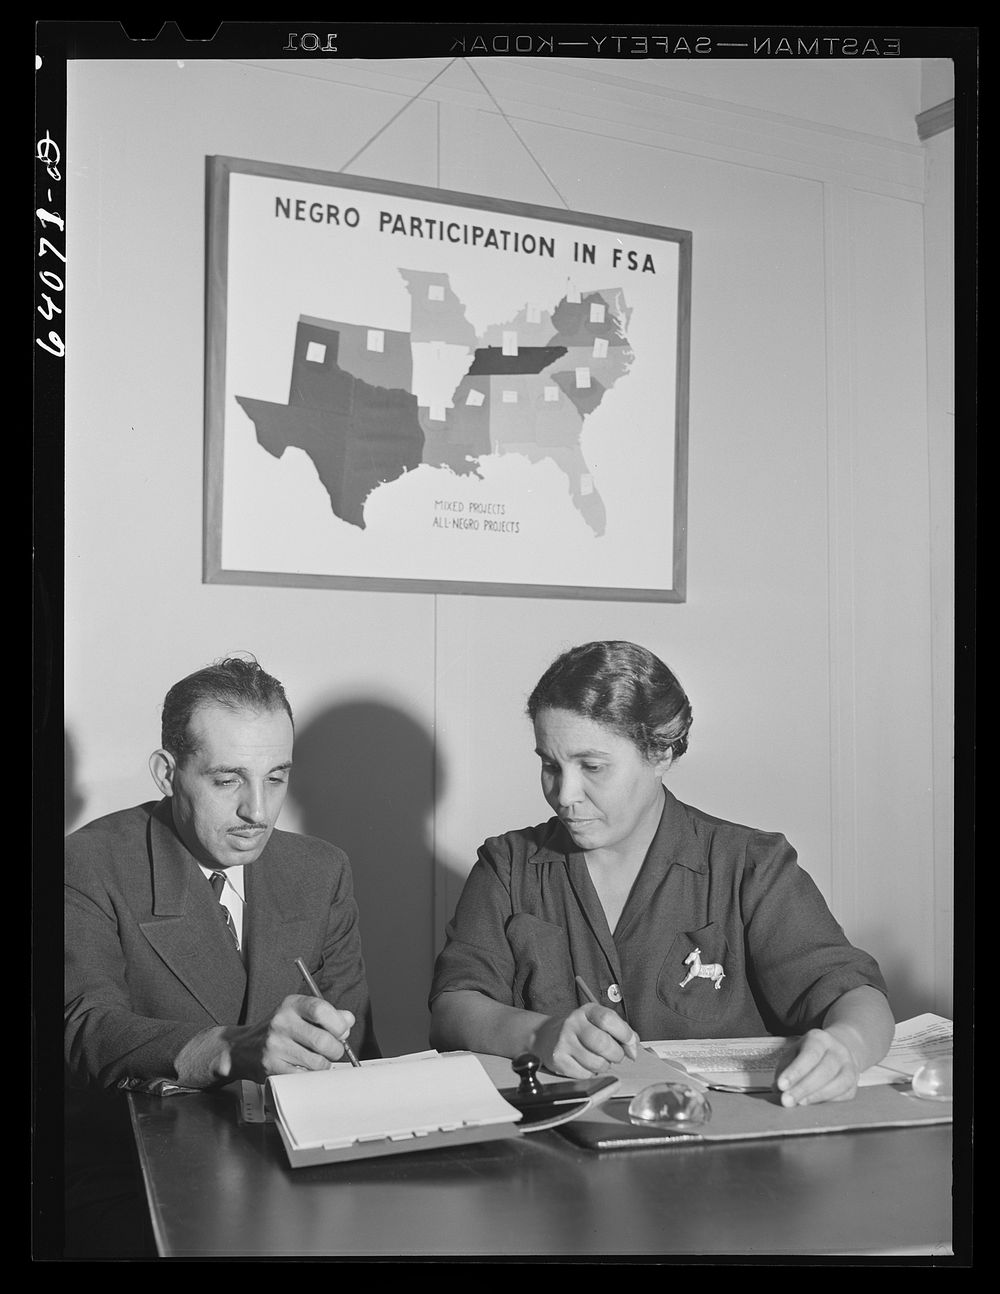 Constance Daniel and Jerome Robinson, FSA (Farm Security Administration). Sourced from the Library of Congress.